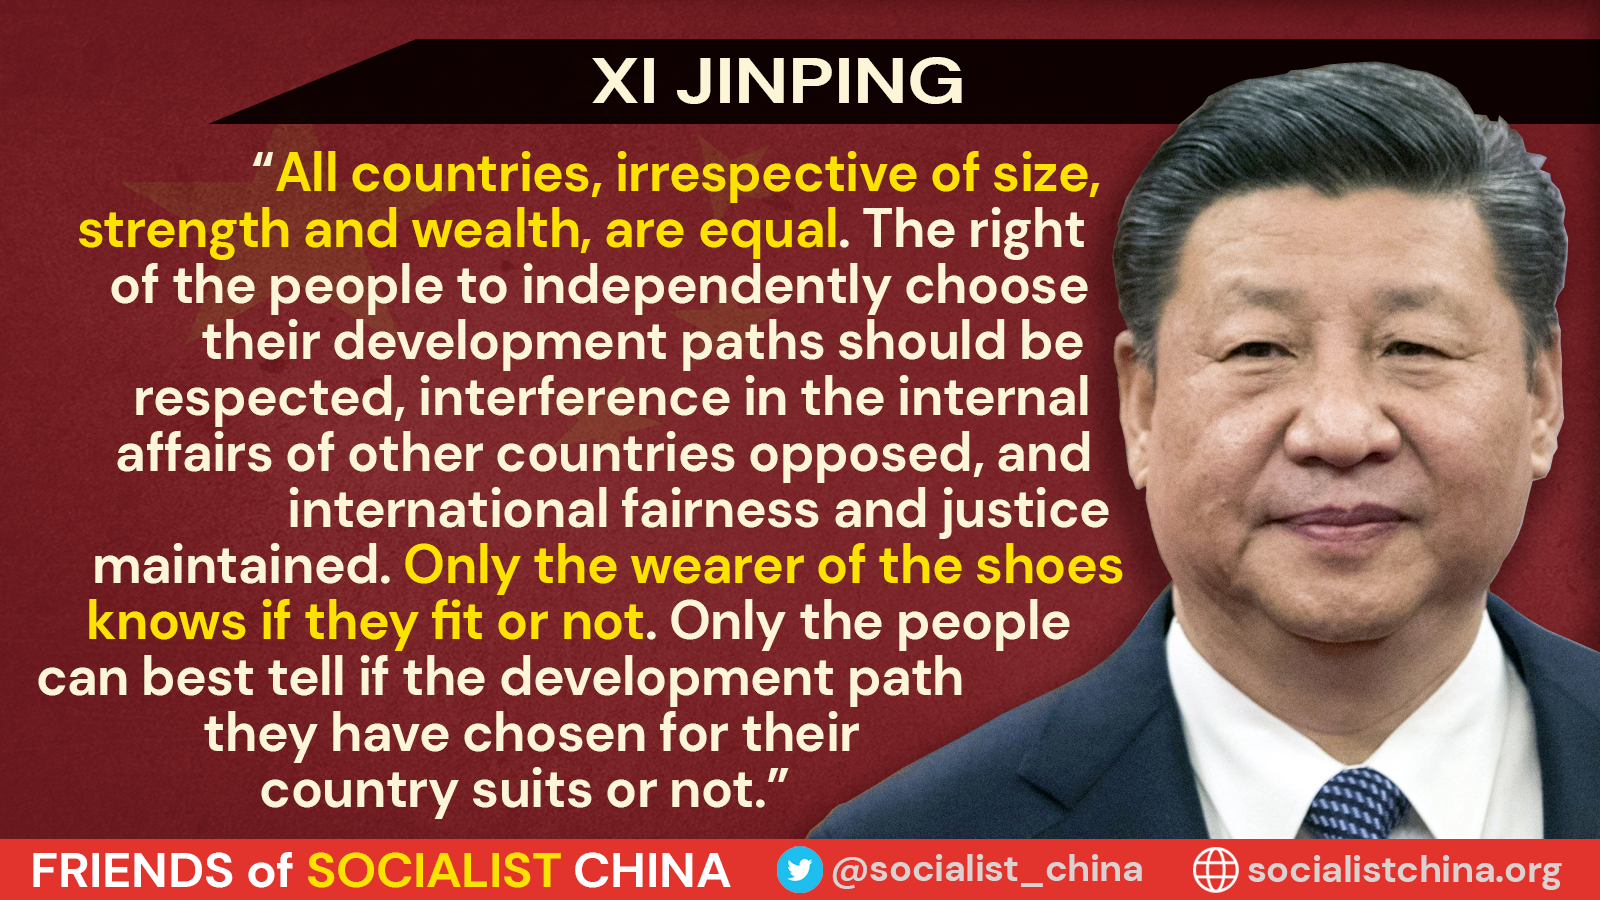 Xi Jinping quote on multipolarity - Friends of Socialist China